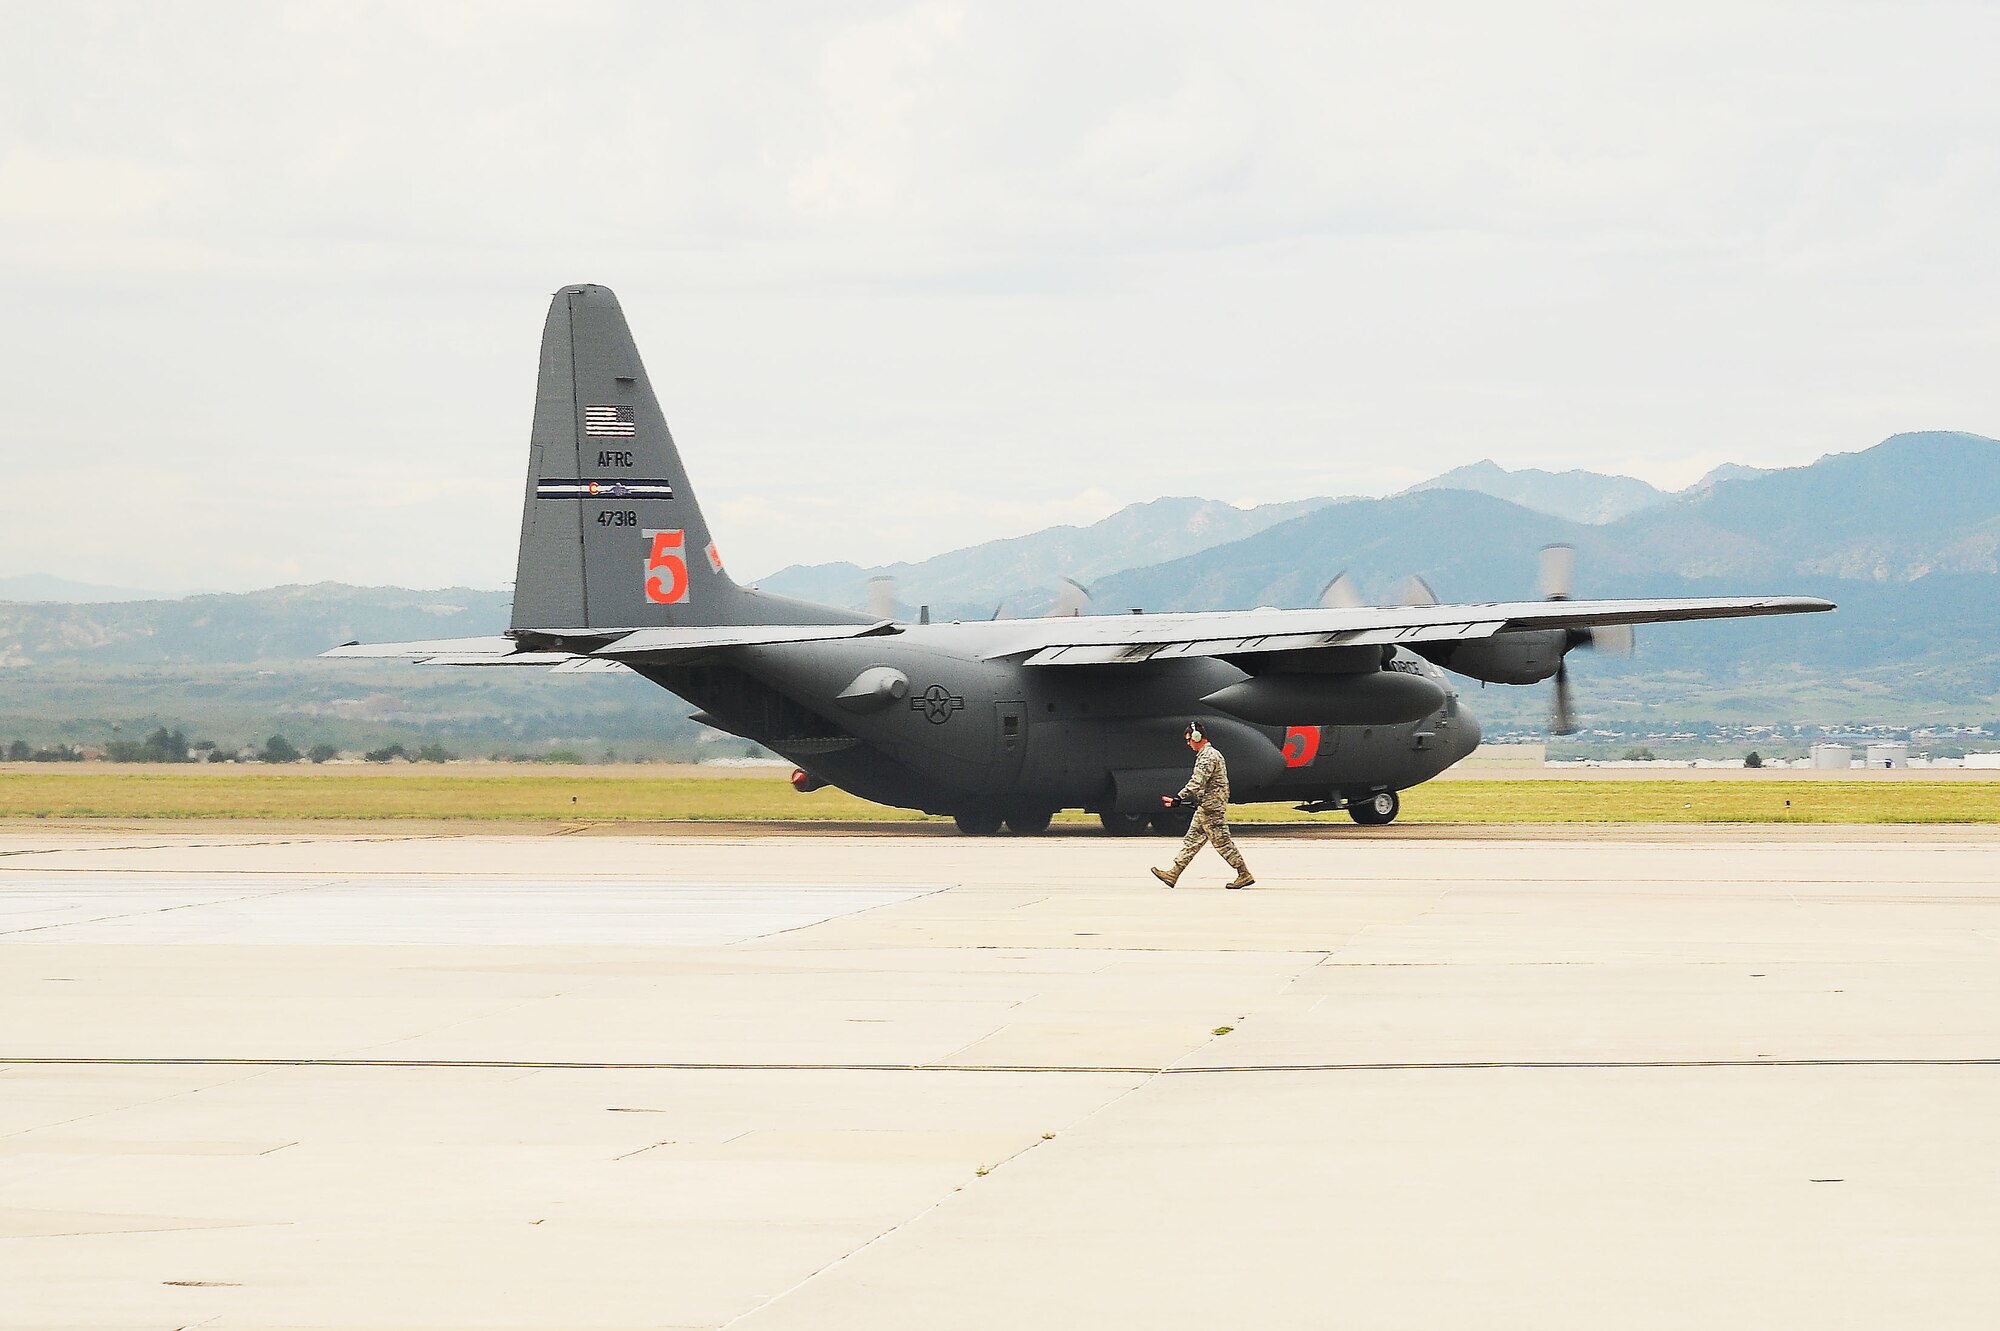 Modular Airborne Fire Fighting System-equipped C-130s from the Air Force Reserve Command's 302nd Airlift Wing depart Peterson AFB, Colorado, Aug., 3, 2015 in response to the initial National Interagency Fire Center MAFFS request for assistance. As of Aug., 12, 2015, the two 302nd AW MAFFS-equipped C-130s and crews have made 91 retardant drops discharging 219,705 gallons of retardant to aid in the suppression of wildland fires in California. (U.S. Air Force photo/Senior Airman Amber Sorsek)